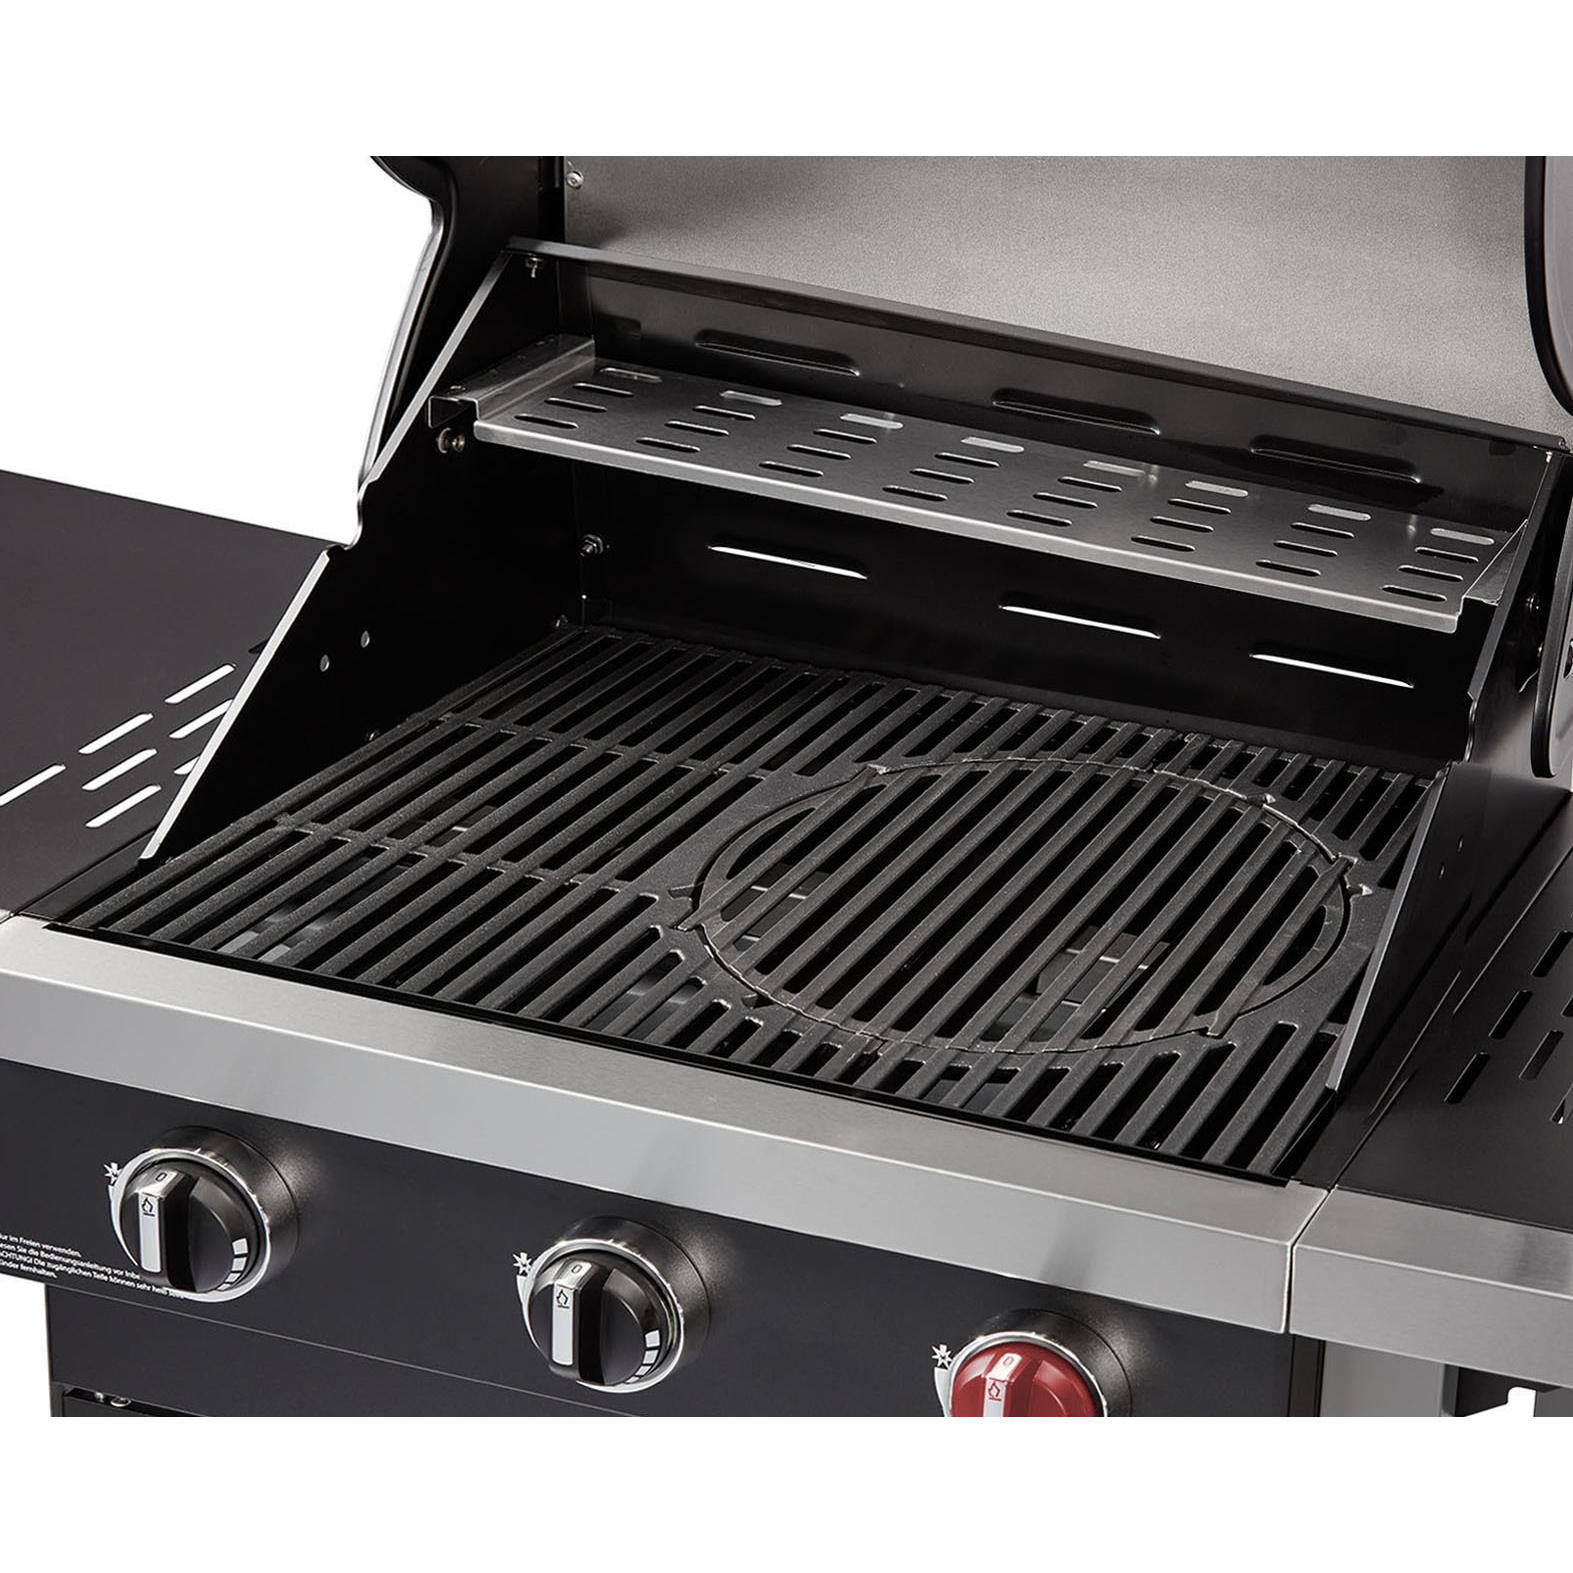 4000591001239 Enders Chicago 3 R Turbo - Grill Hus & Have,Udeliv,Grill 4800012390 8937733